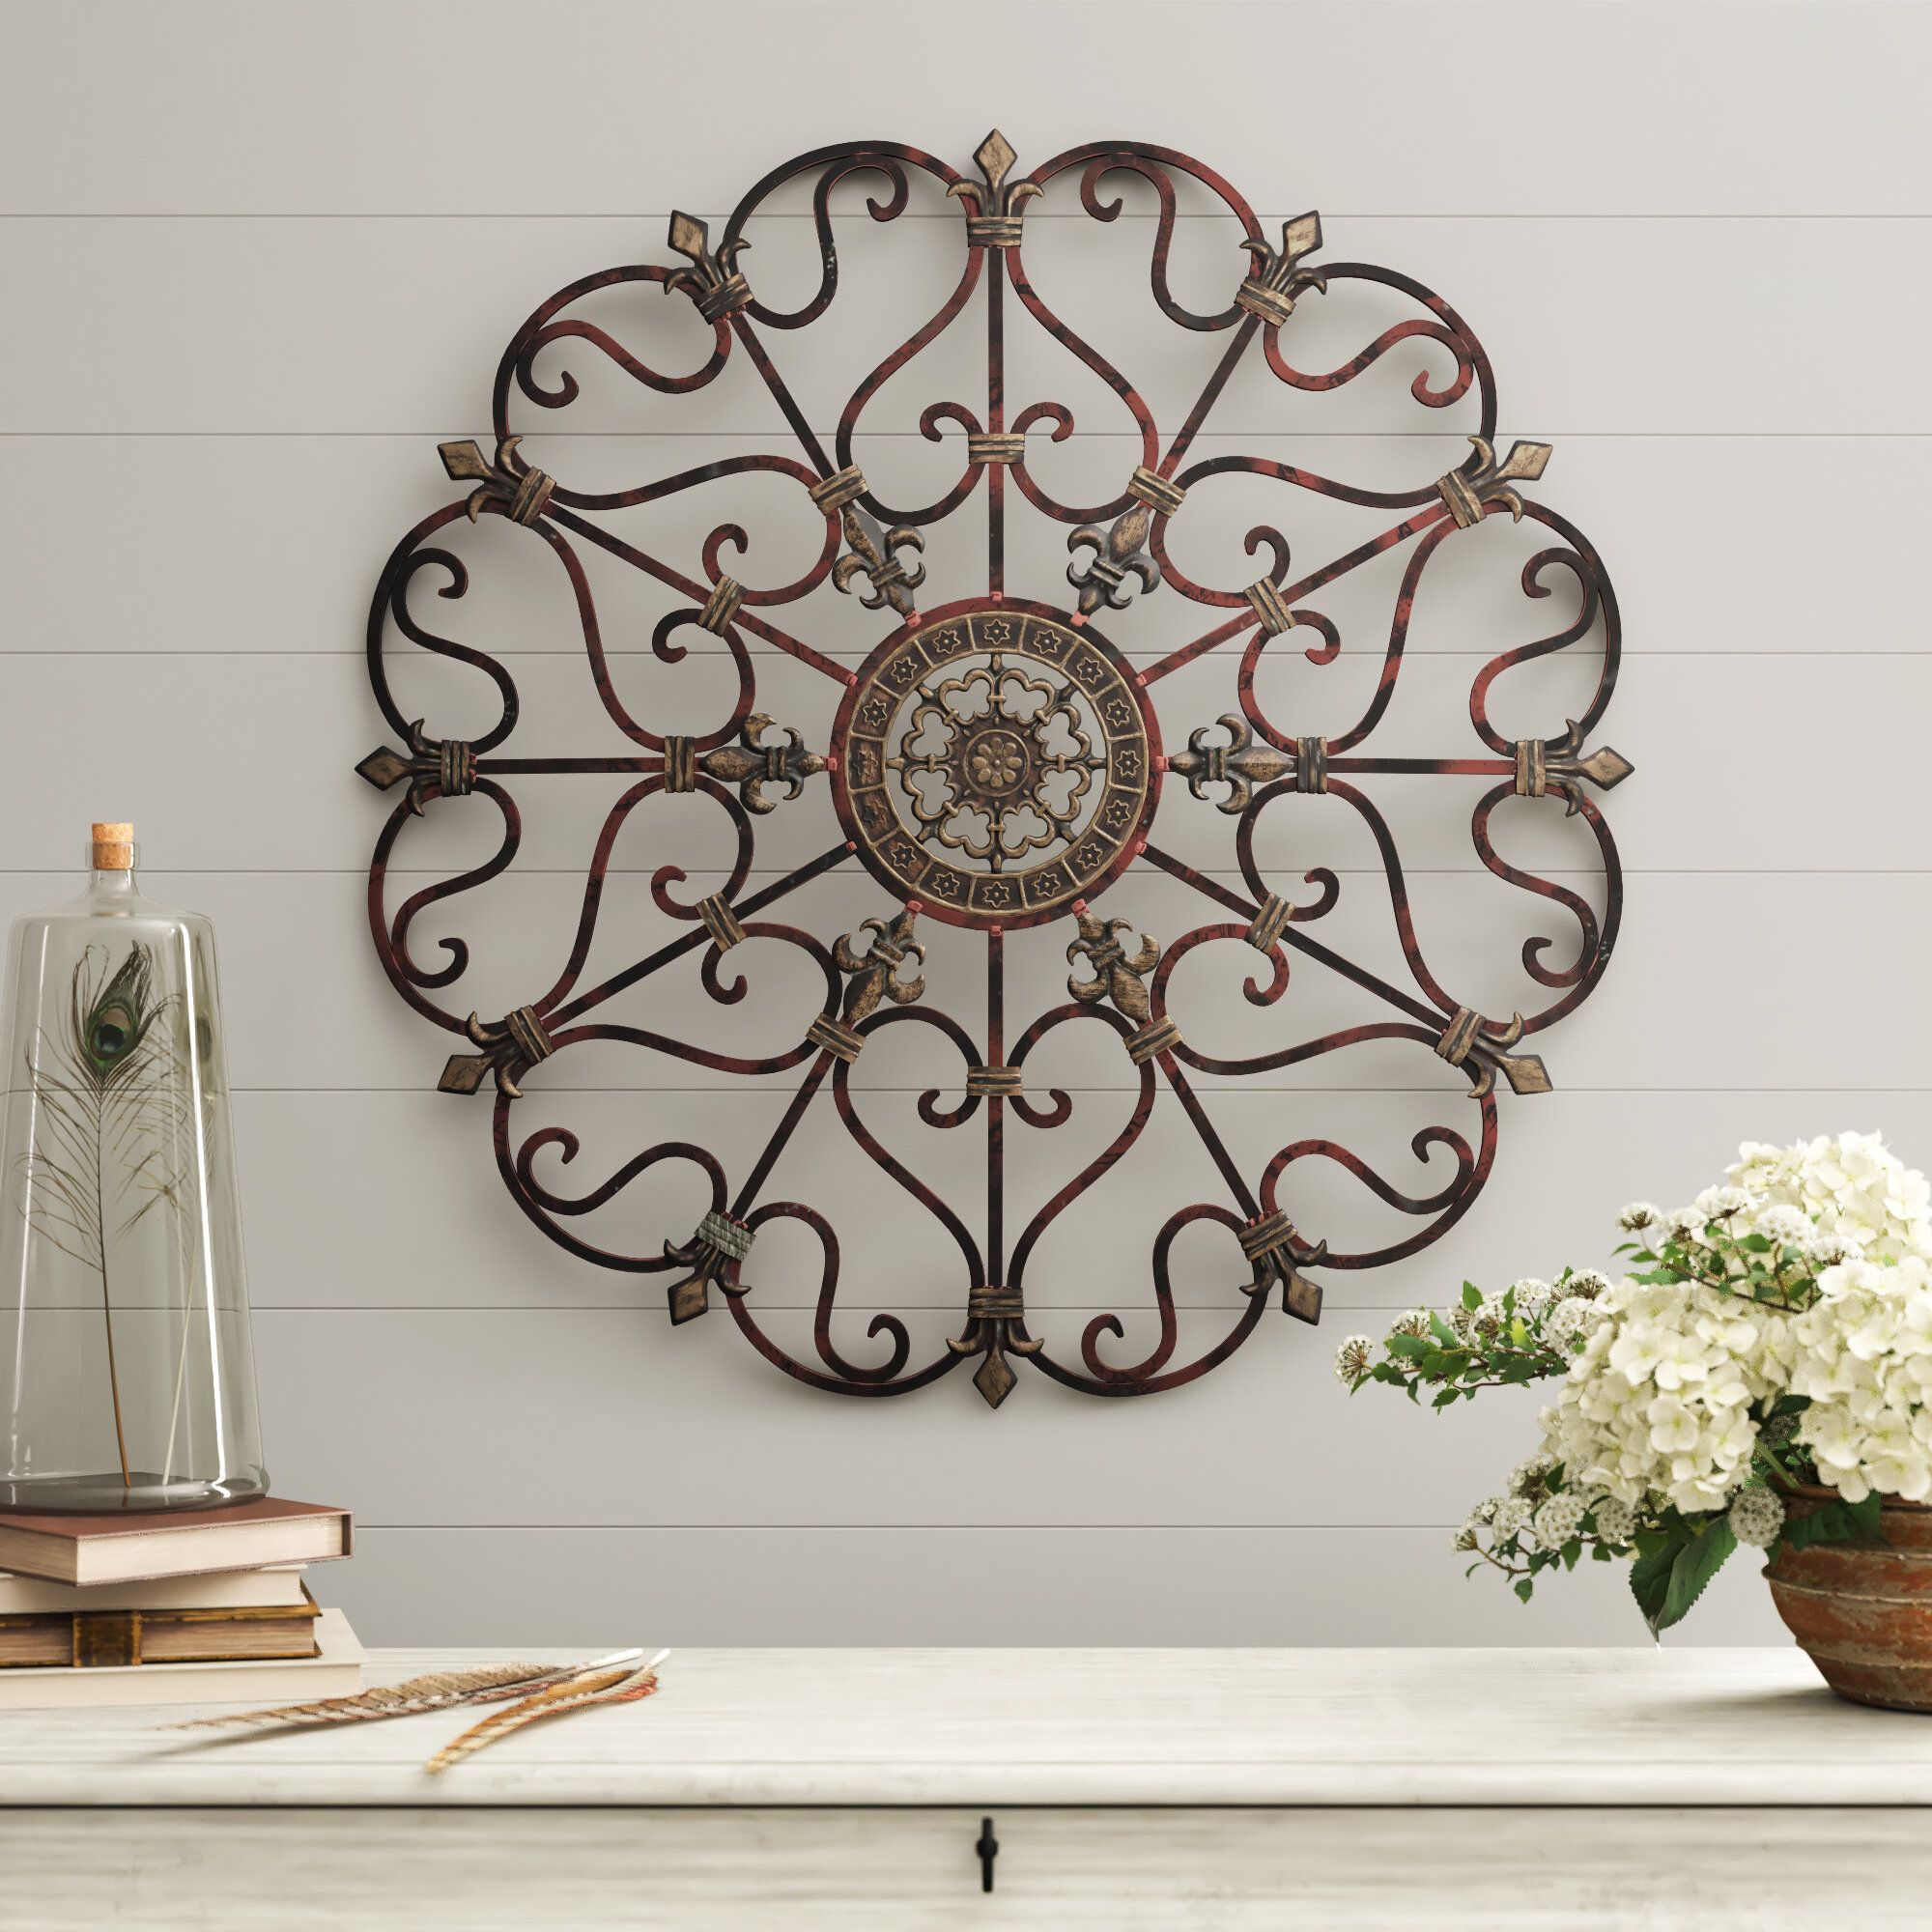 Farmhouse & Rustic Wall Decor | Birch Lane Intended For Raised Star Wall Decor (Photo 13 of 30)